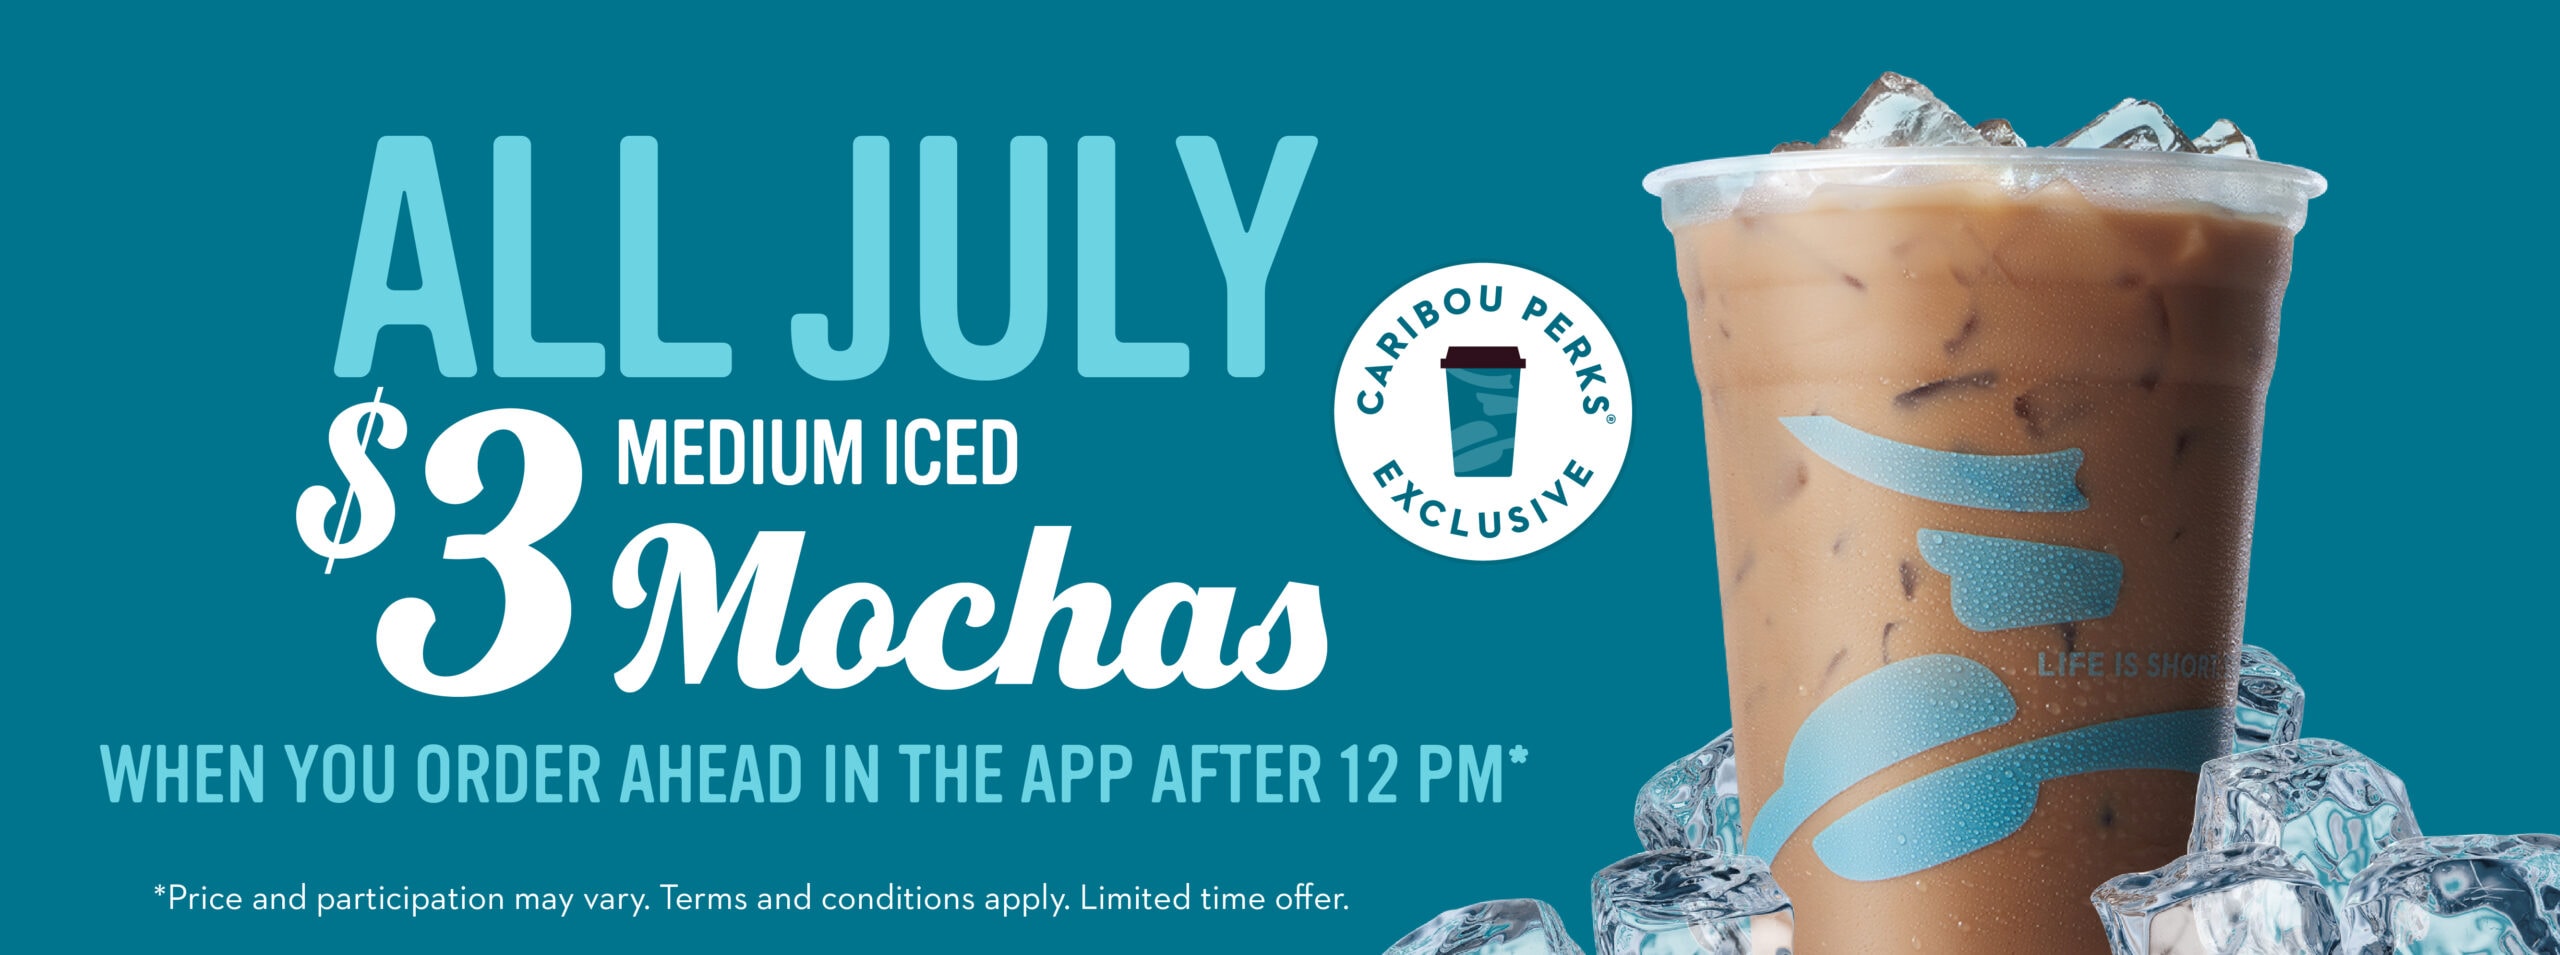 All July $3 medium Iced Mochas. Terms and conditions apply.